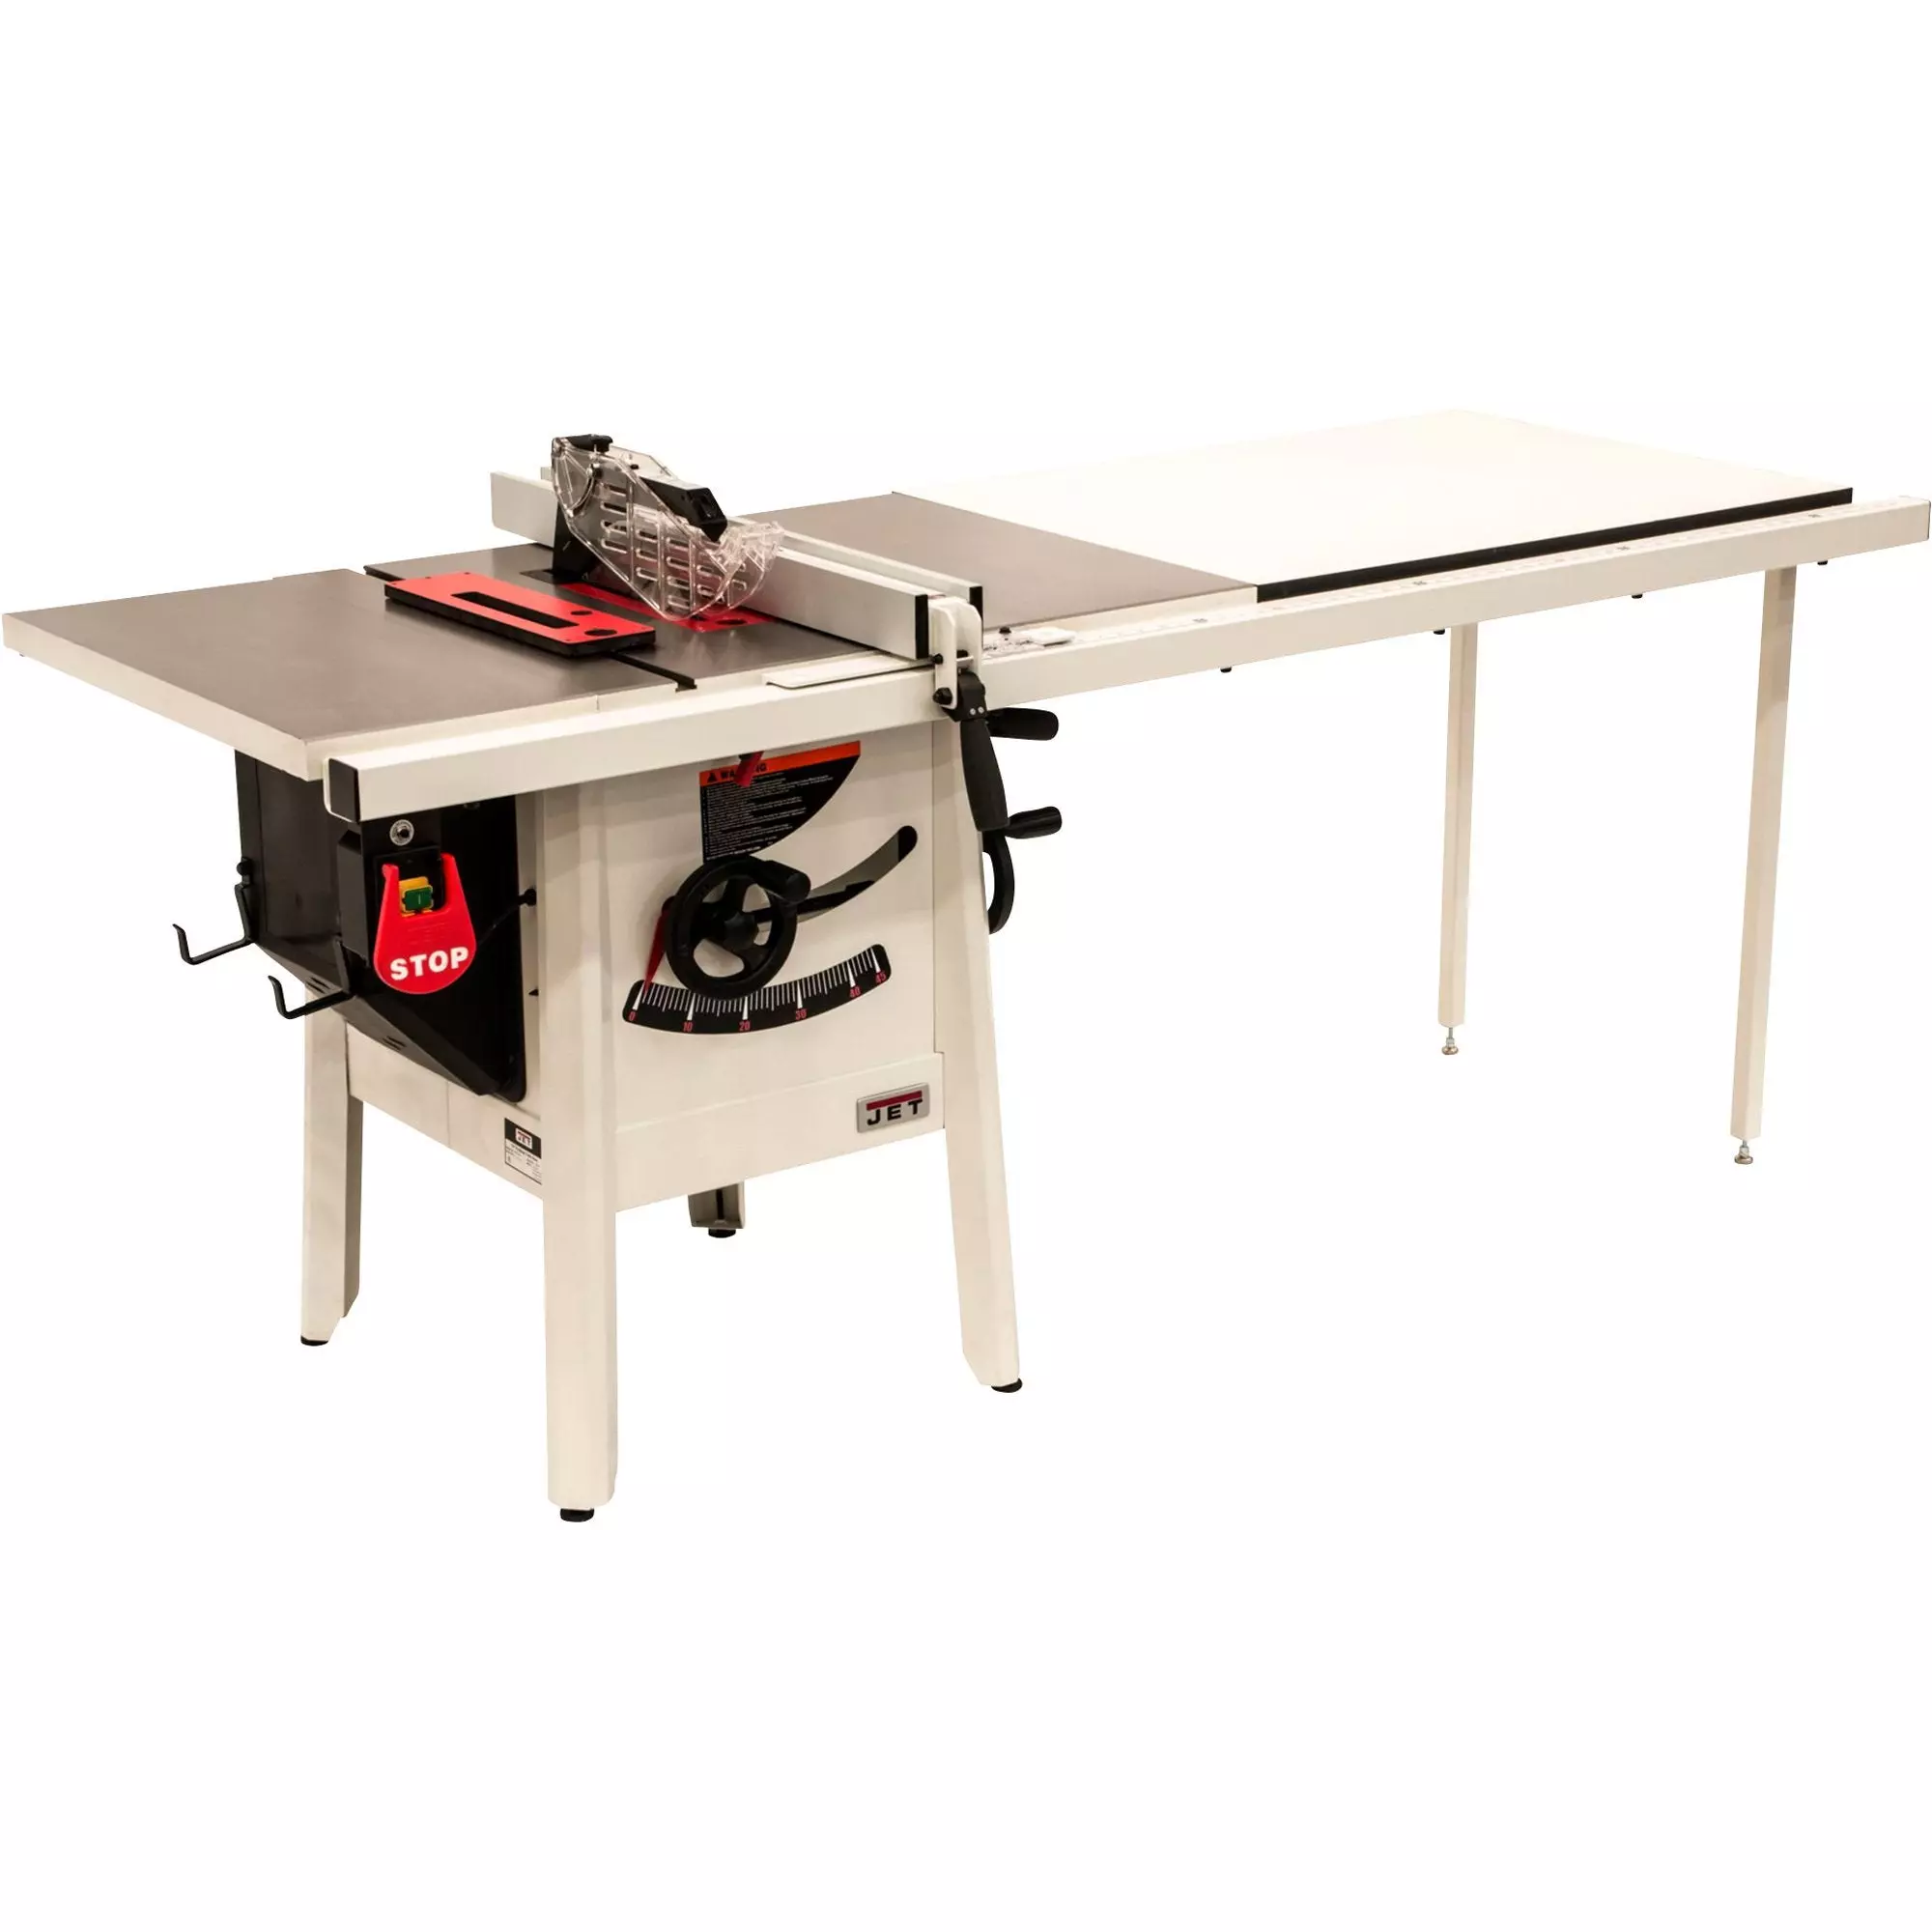 The Best Table Saws: Make Smooth and Accurate Cuts